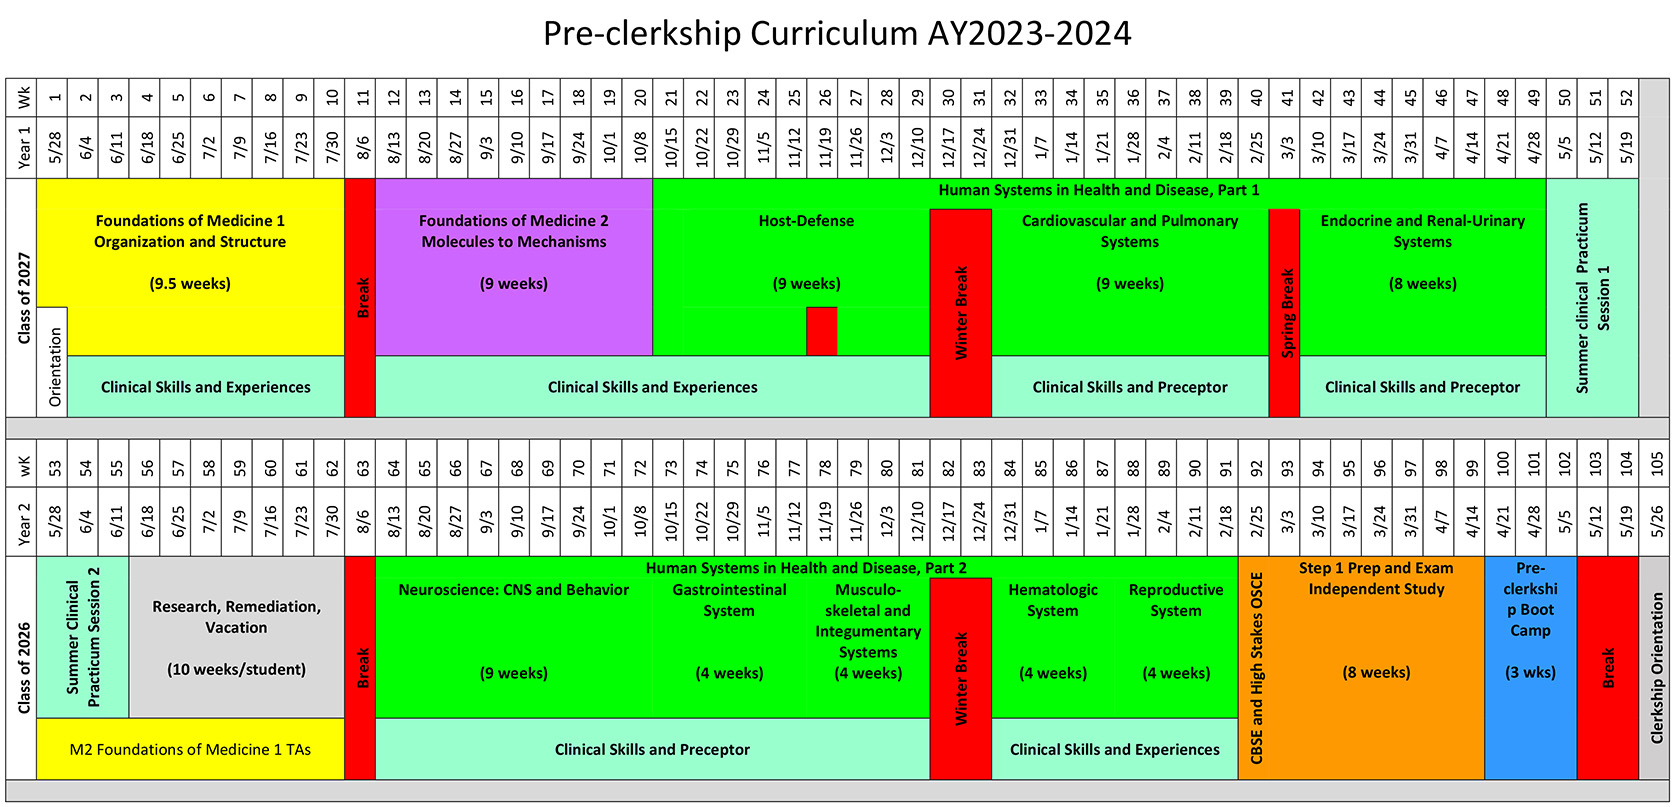 Curriculum Map AY2023 2024 05.23.2023 Small For Web 